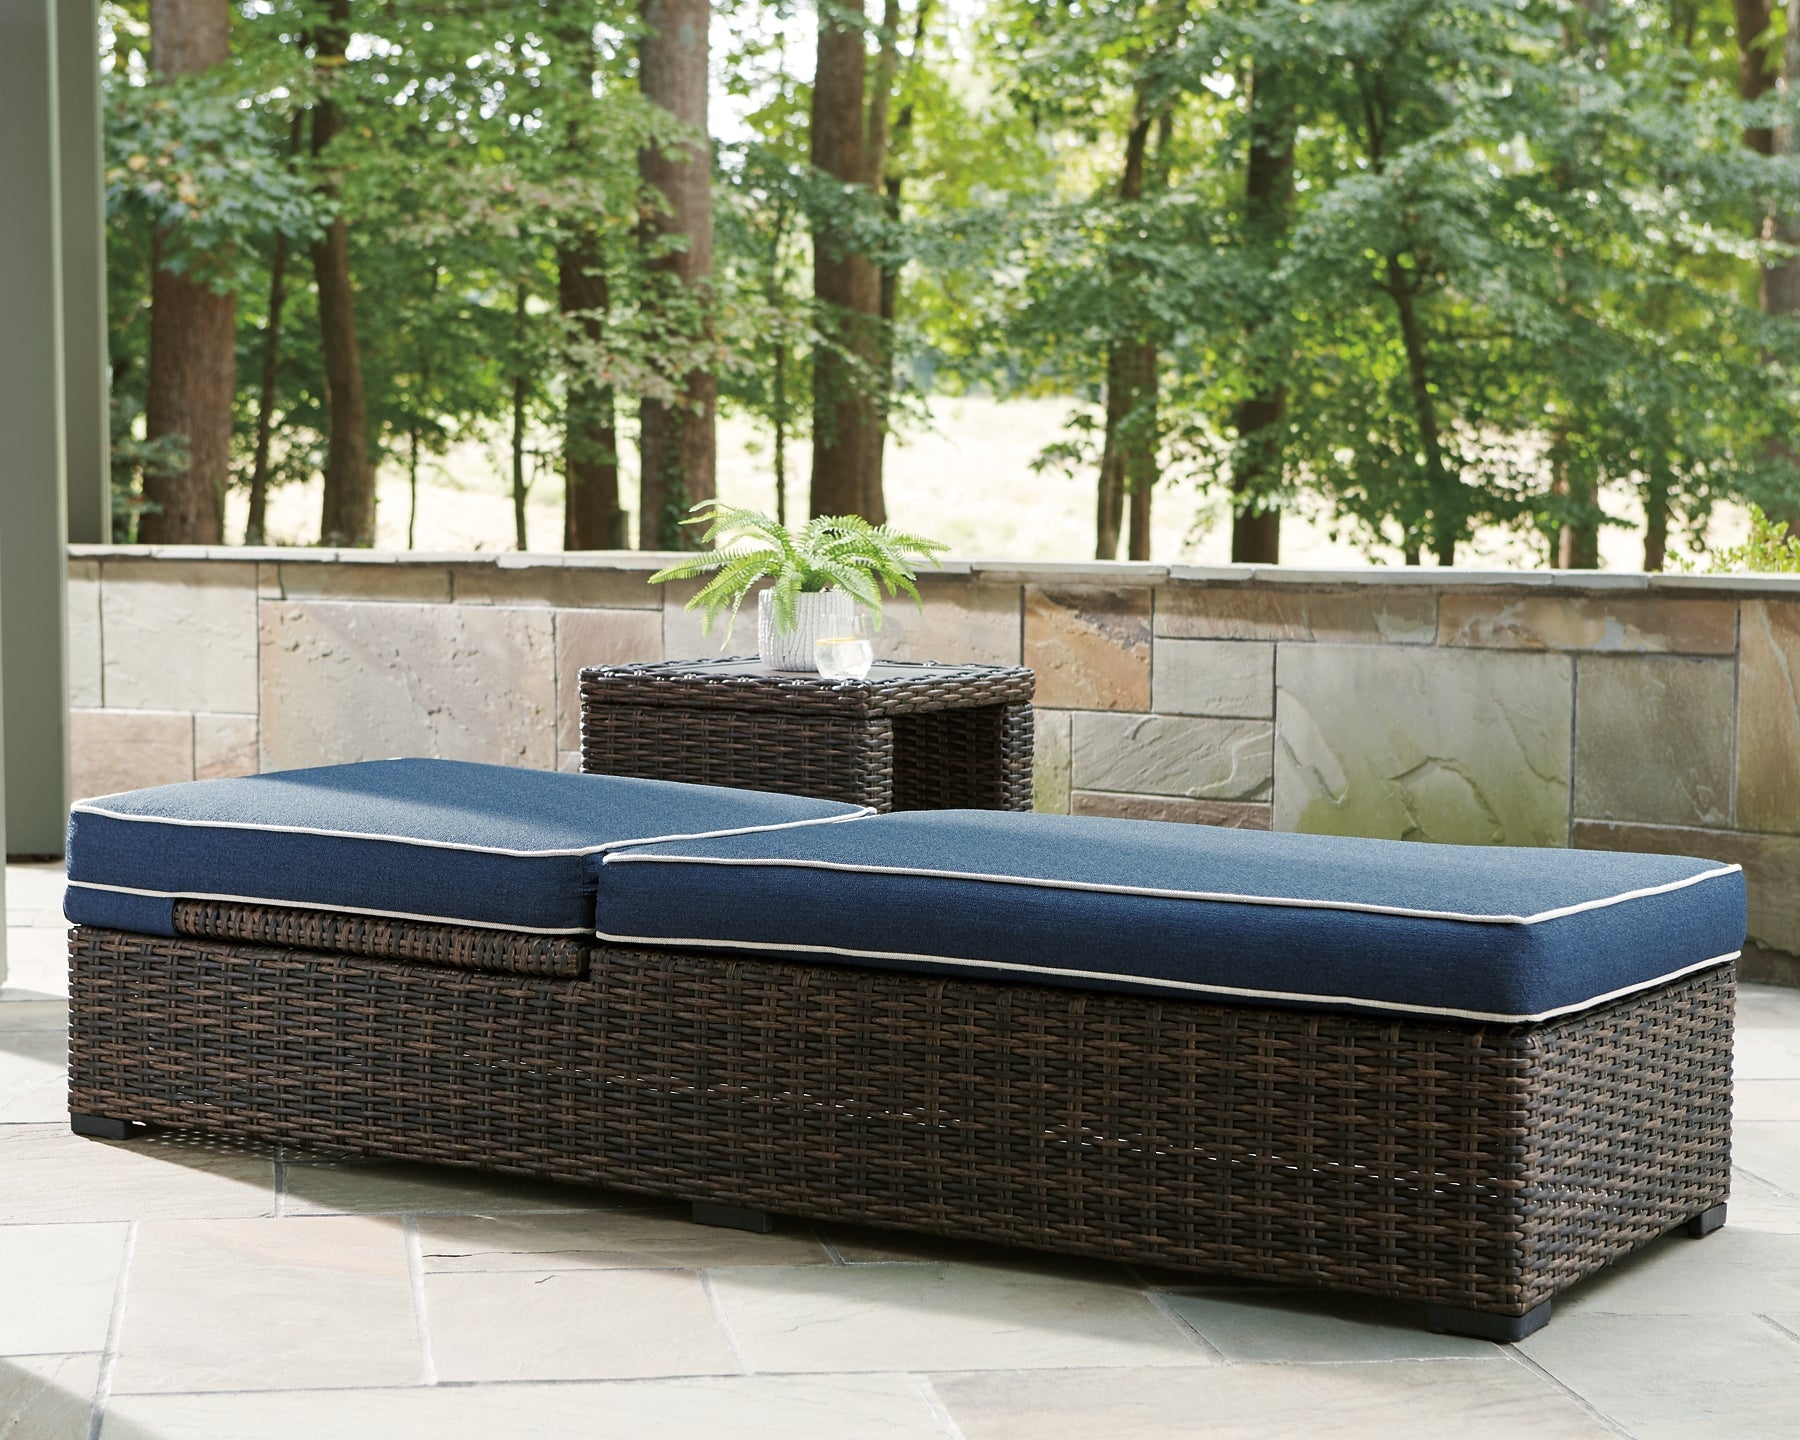 Grasson Lane Chaise Lounge with Cushion at Walker Mattress and Furniture Locations in Cedar Park and Belton TX.